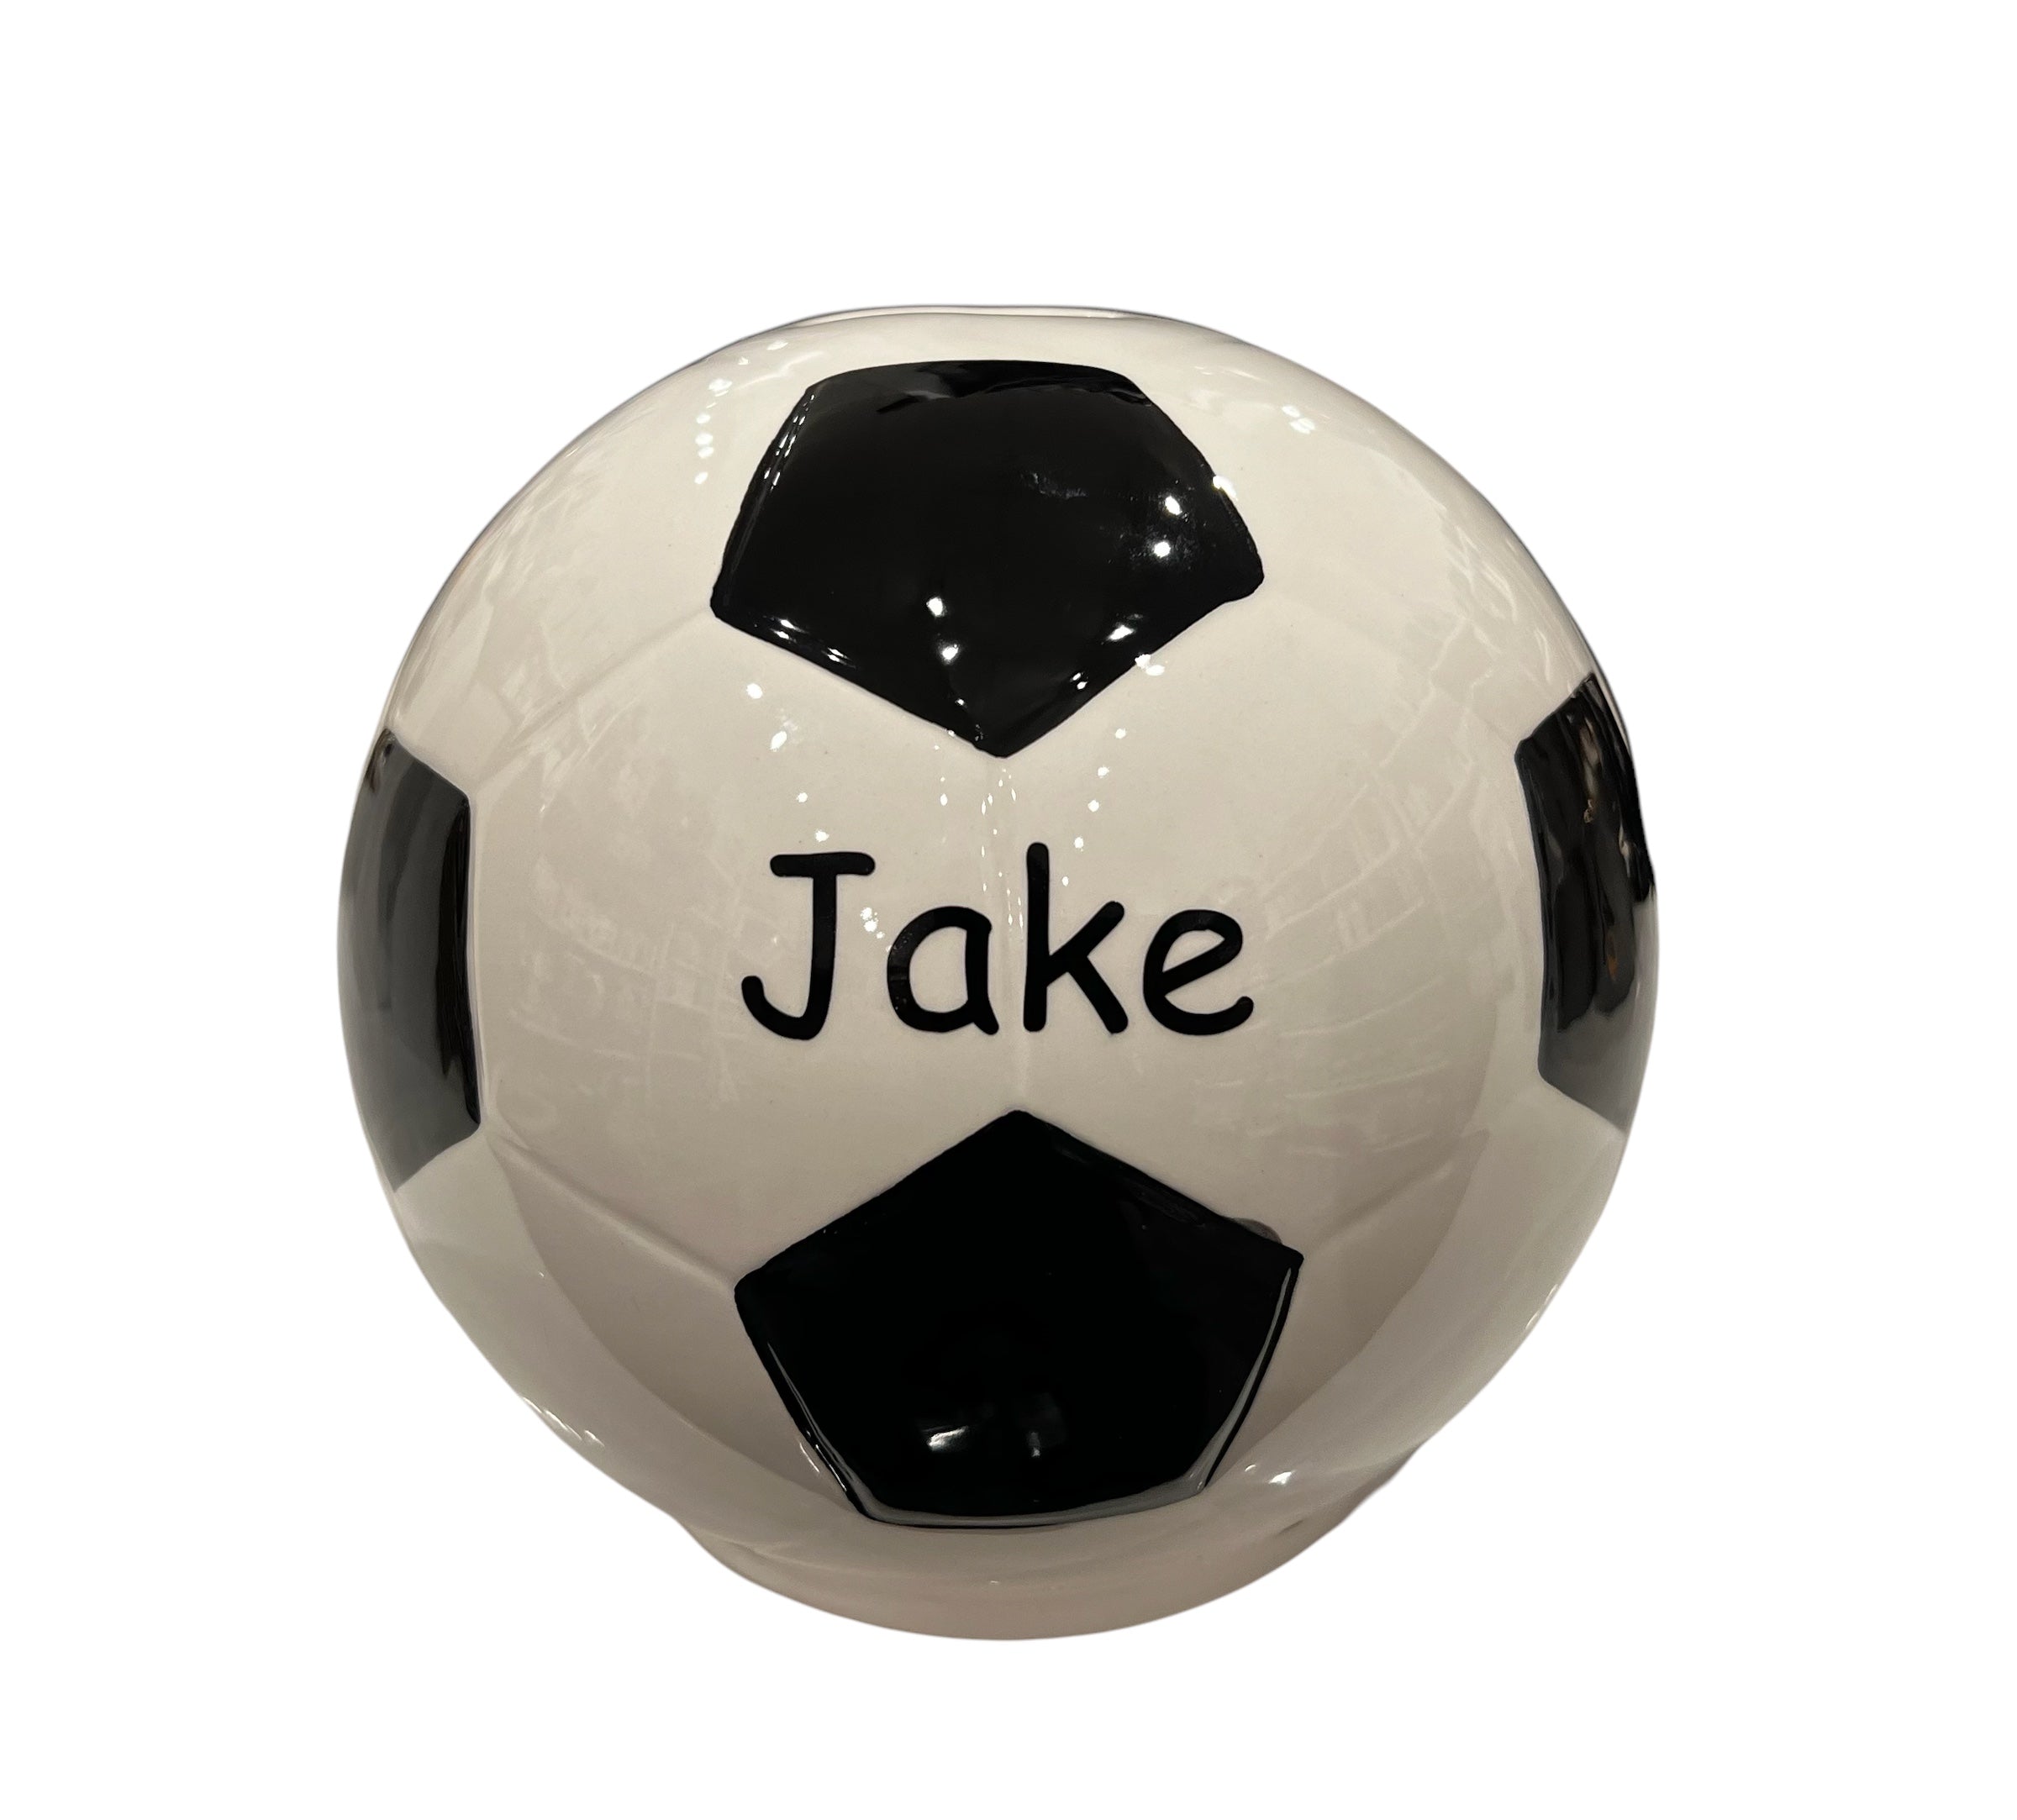 Personalized Bank Ceramic - Soccer